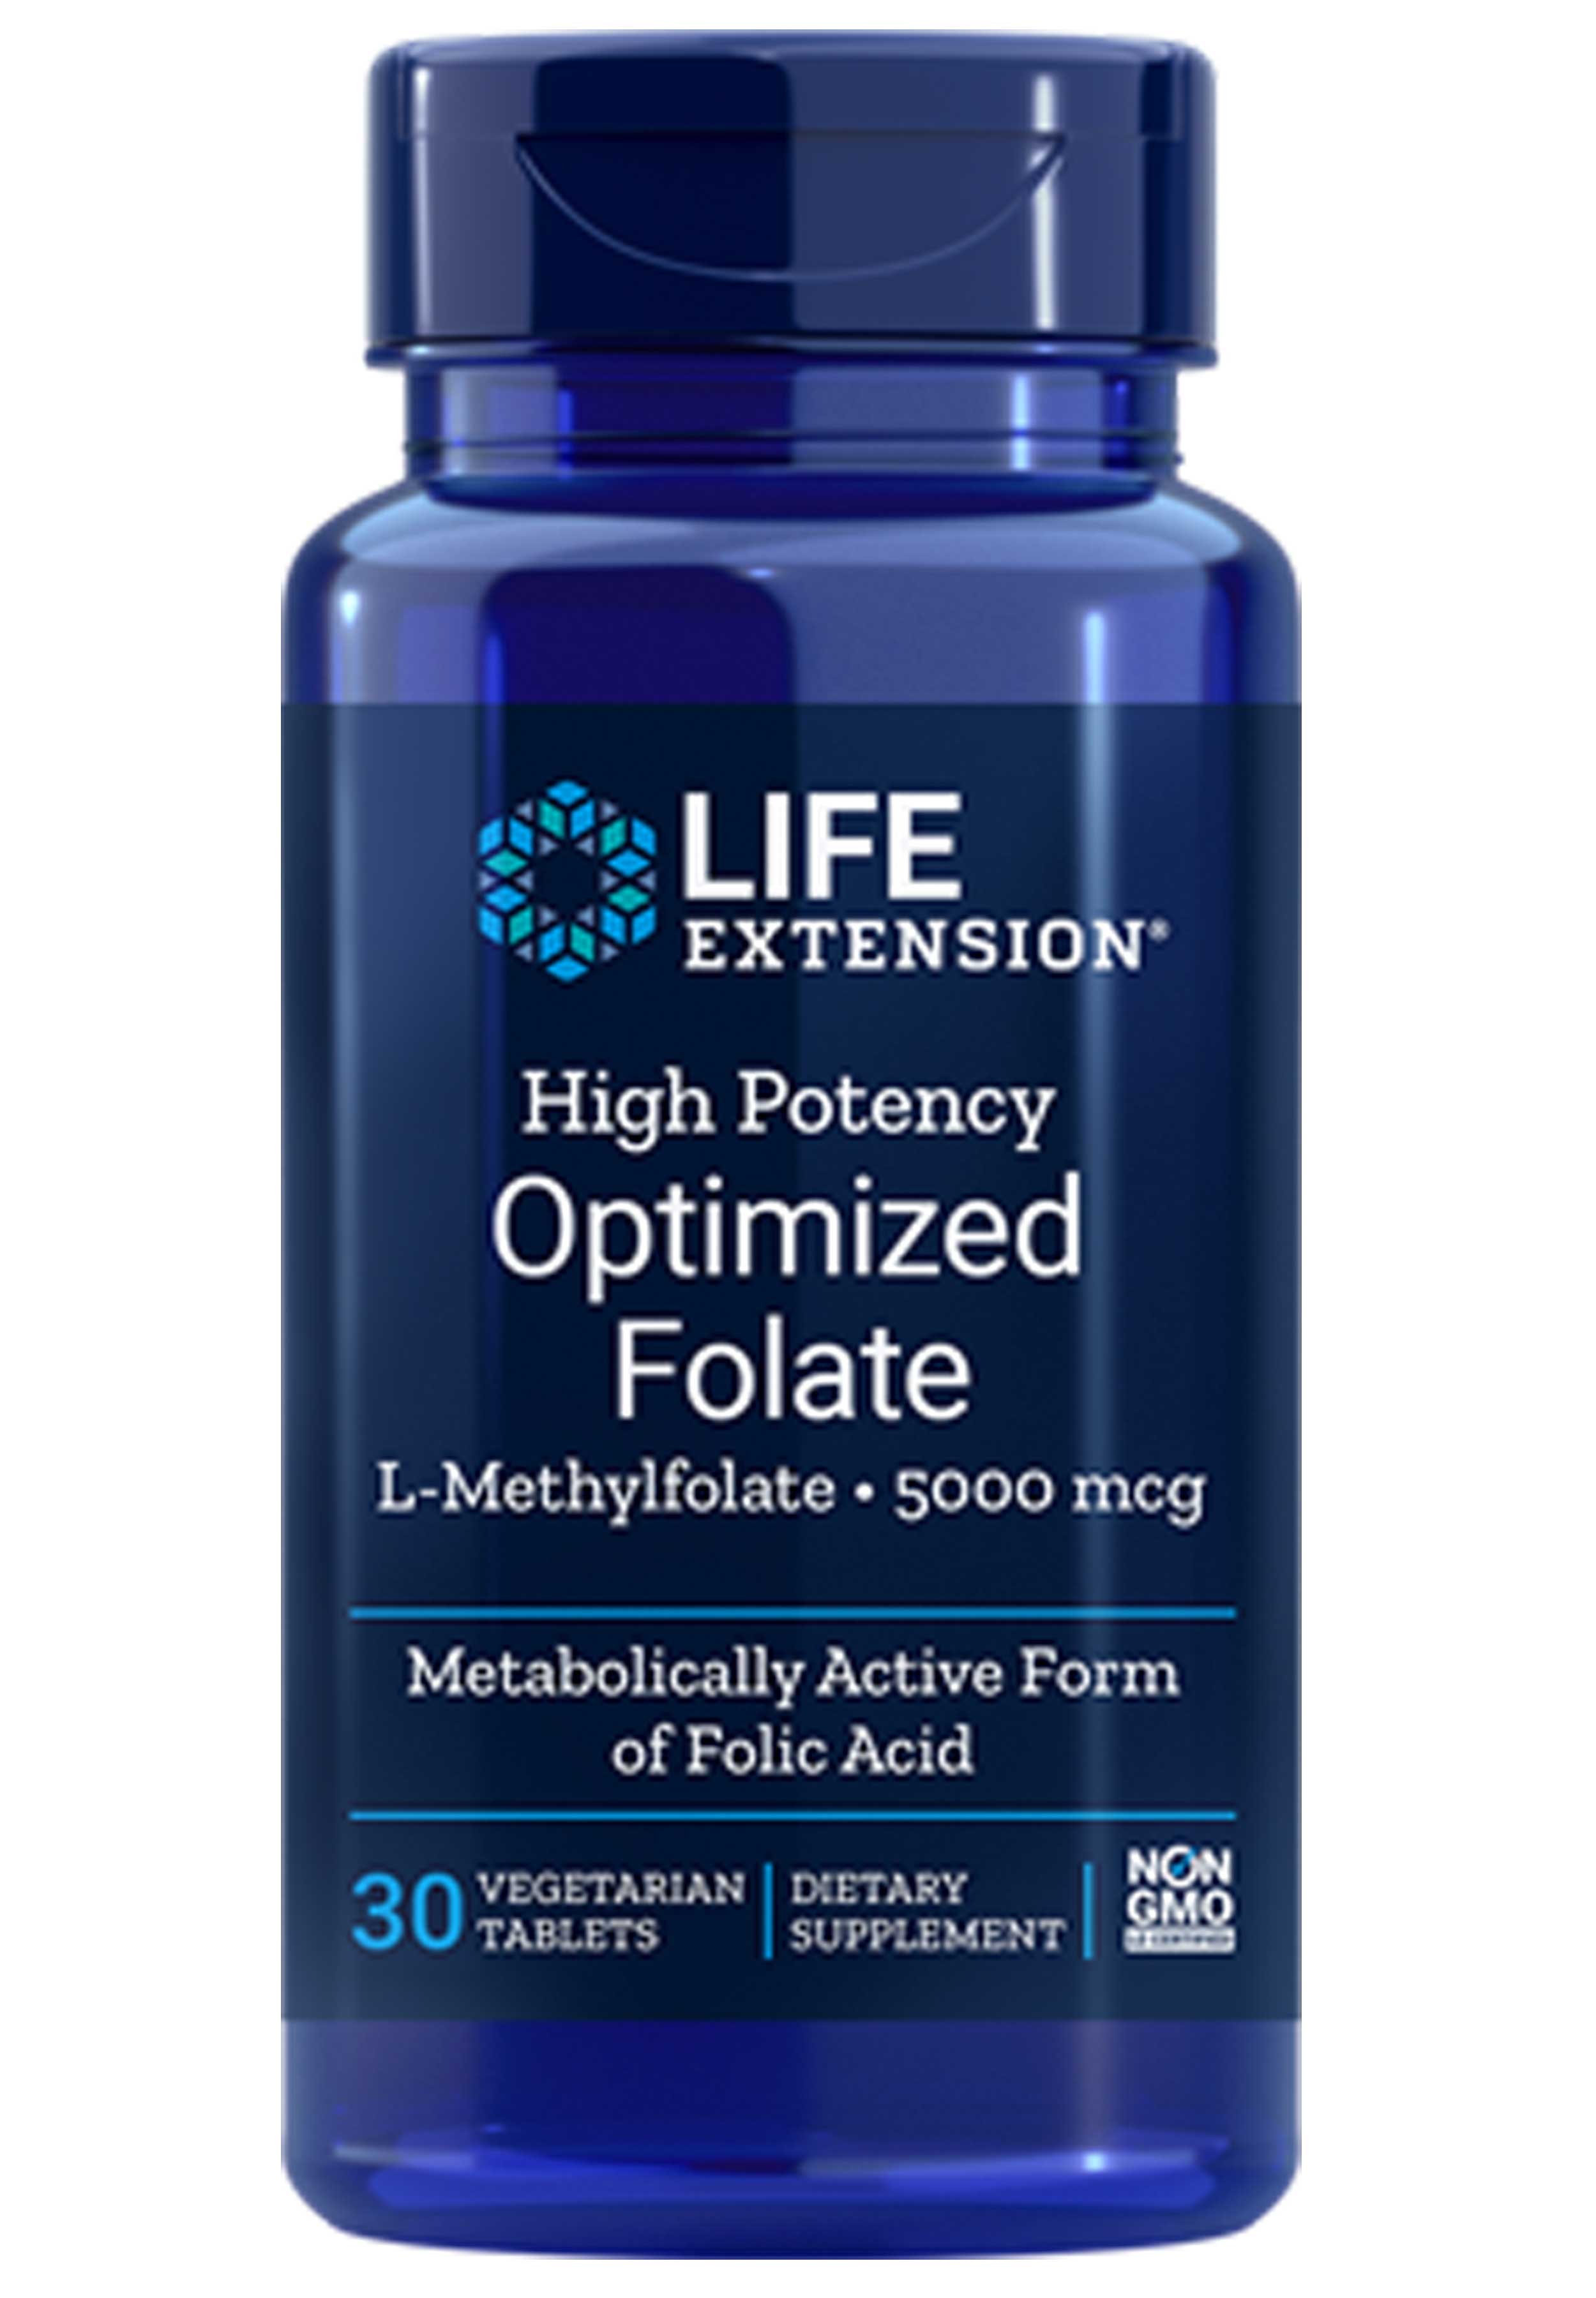 Life Extension Optimized Folate (High Potency)